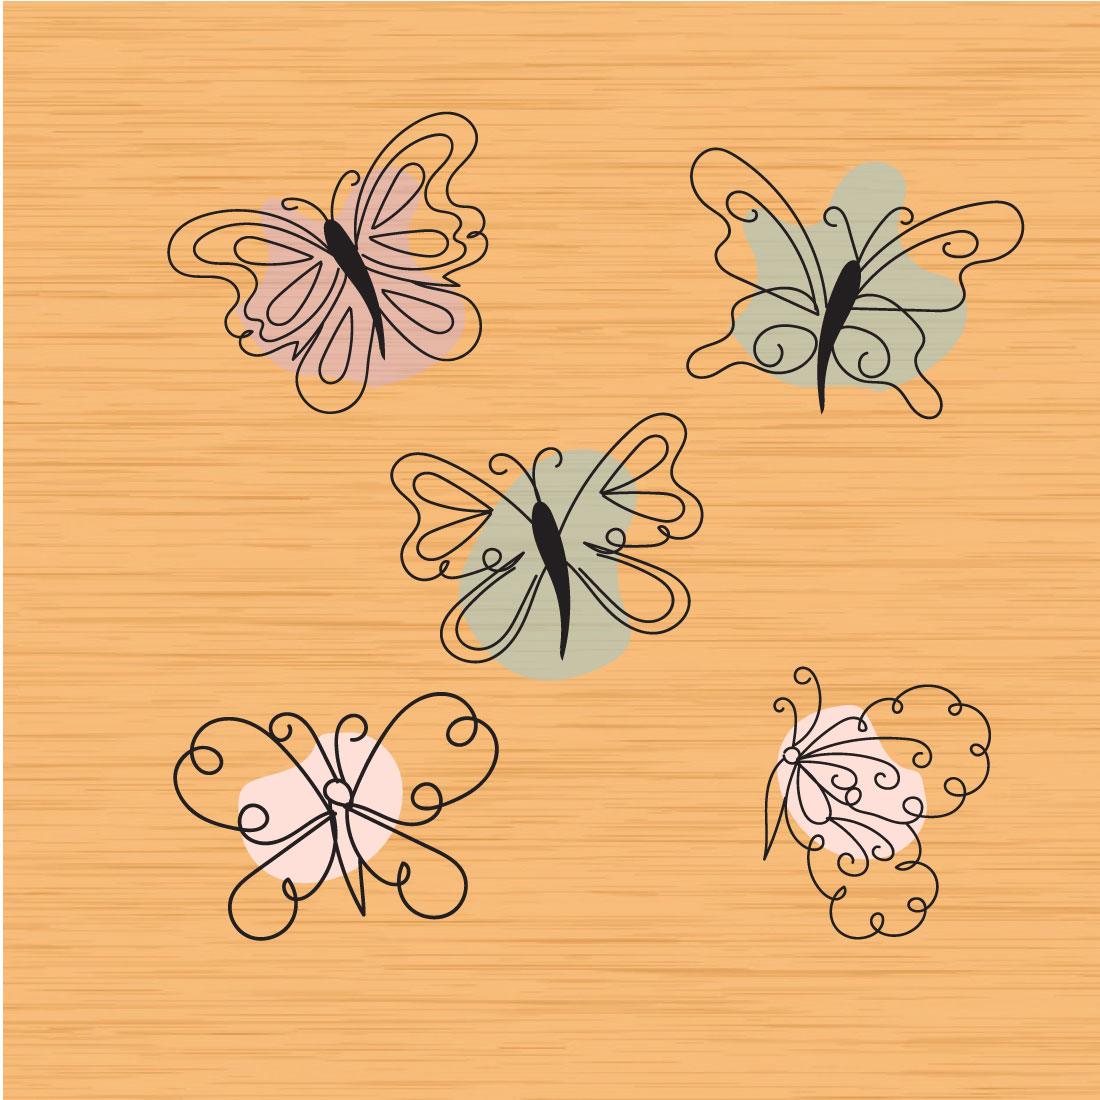 Four butterflies on a wood background.